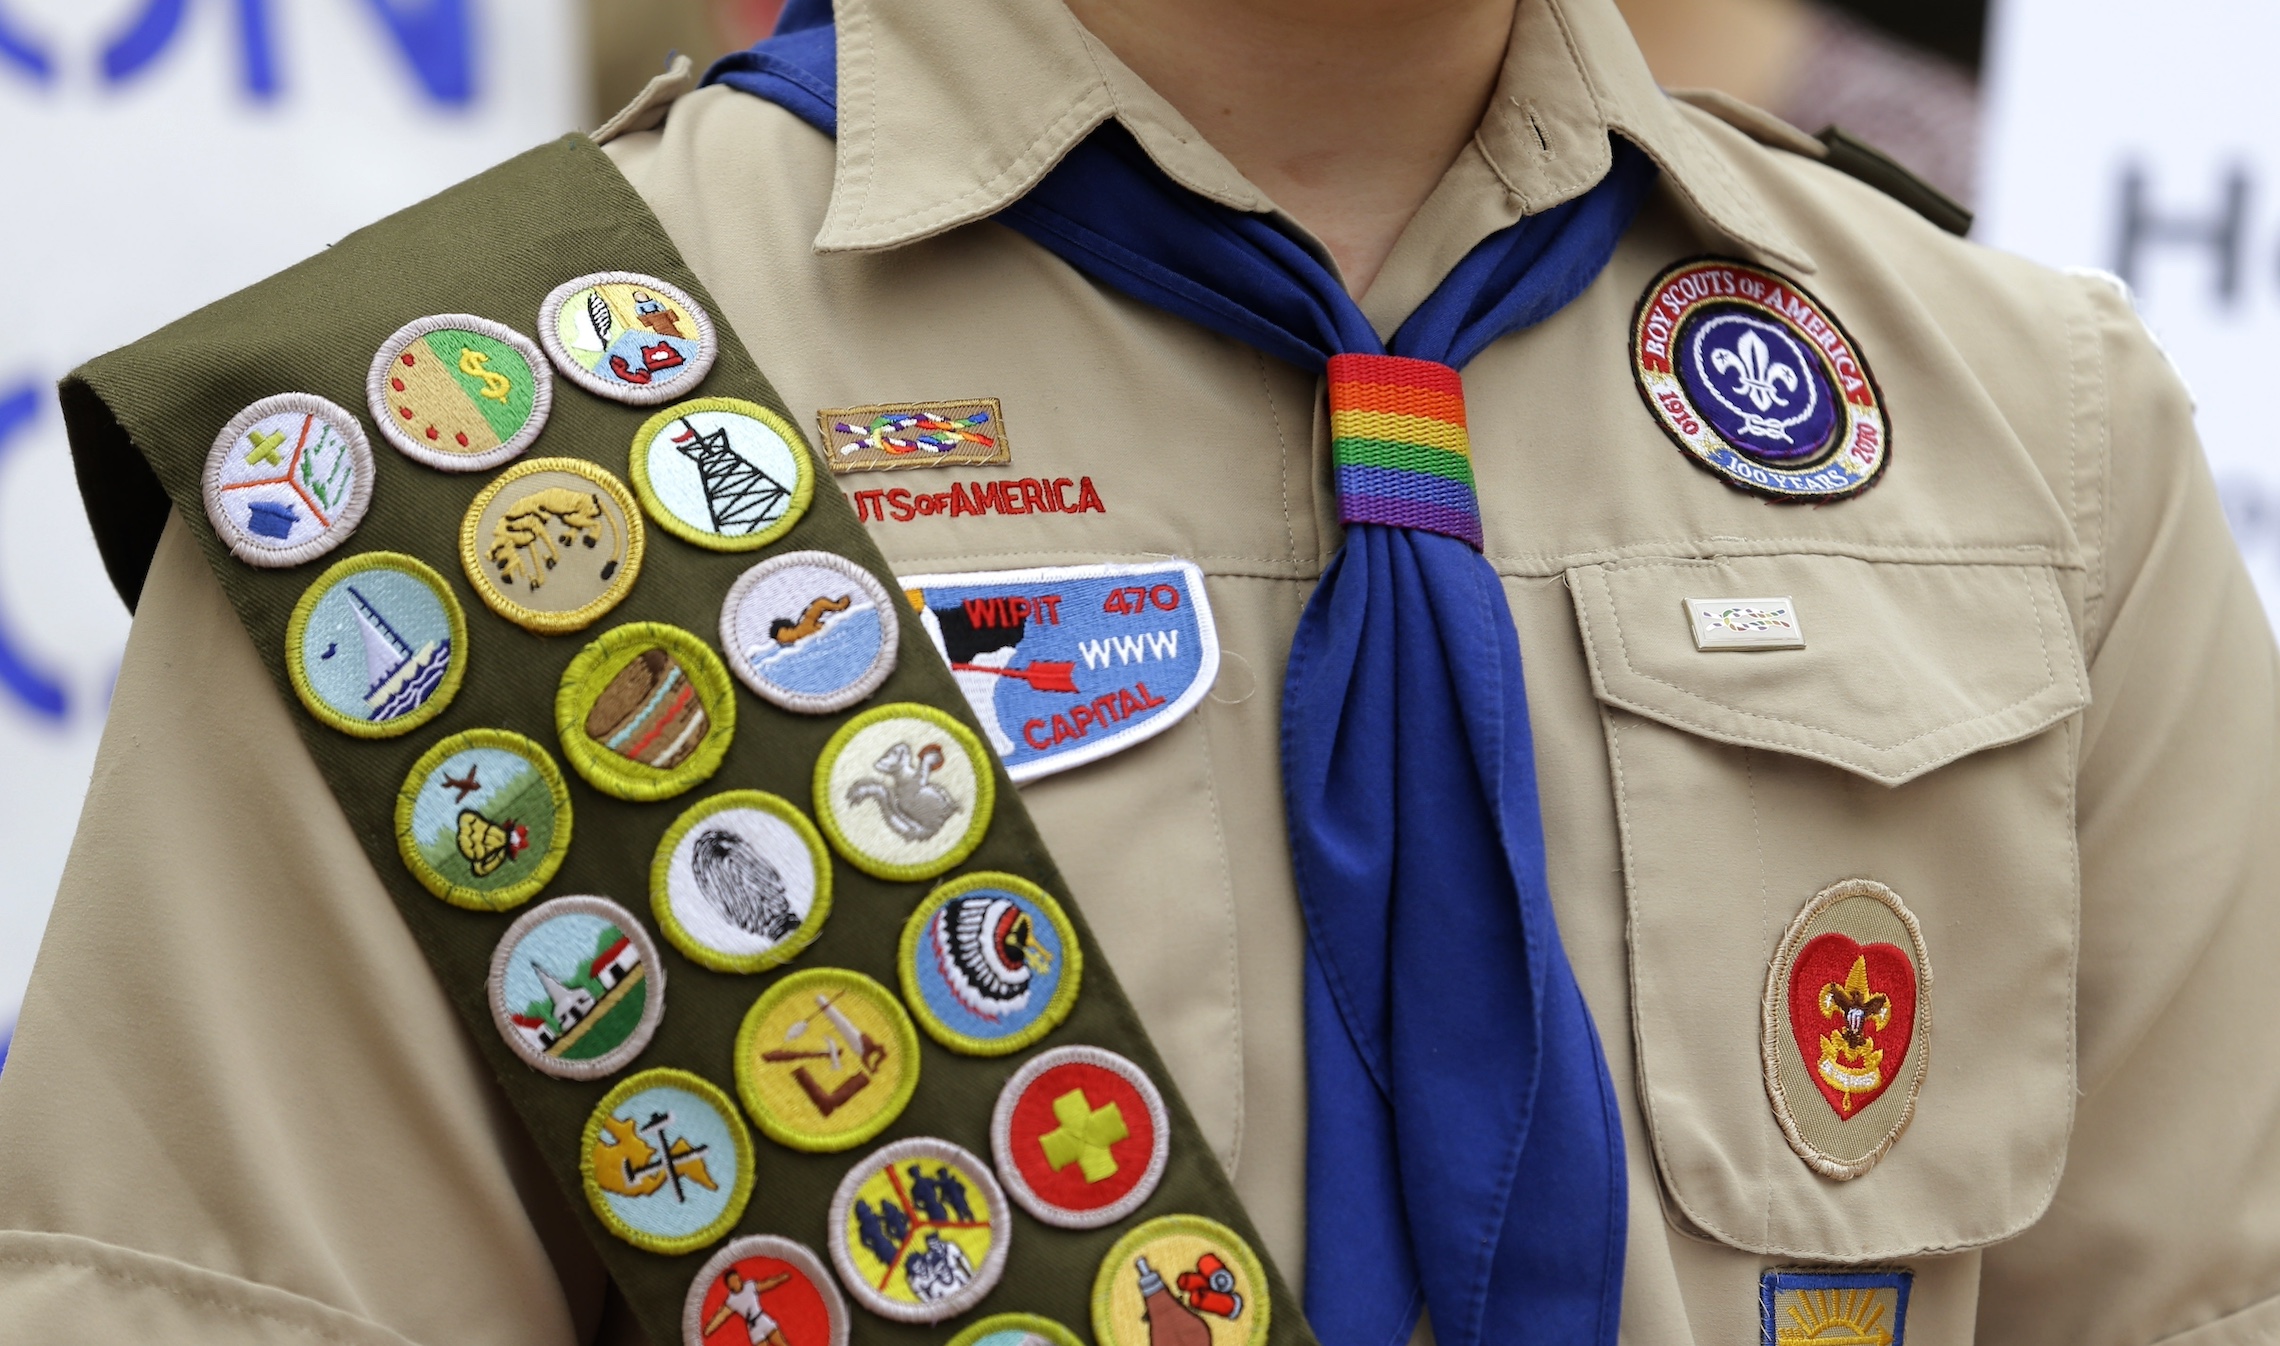 Boy Scouts of America changing name for first time in history - Washington Examiner